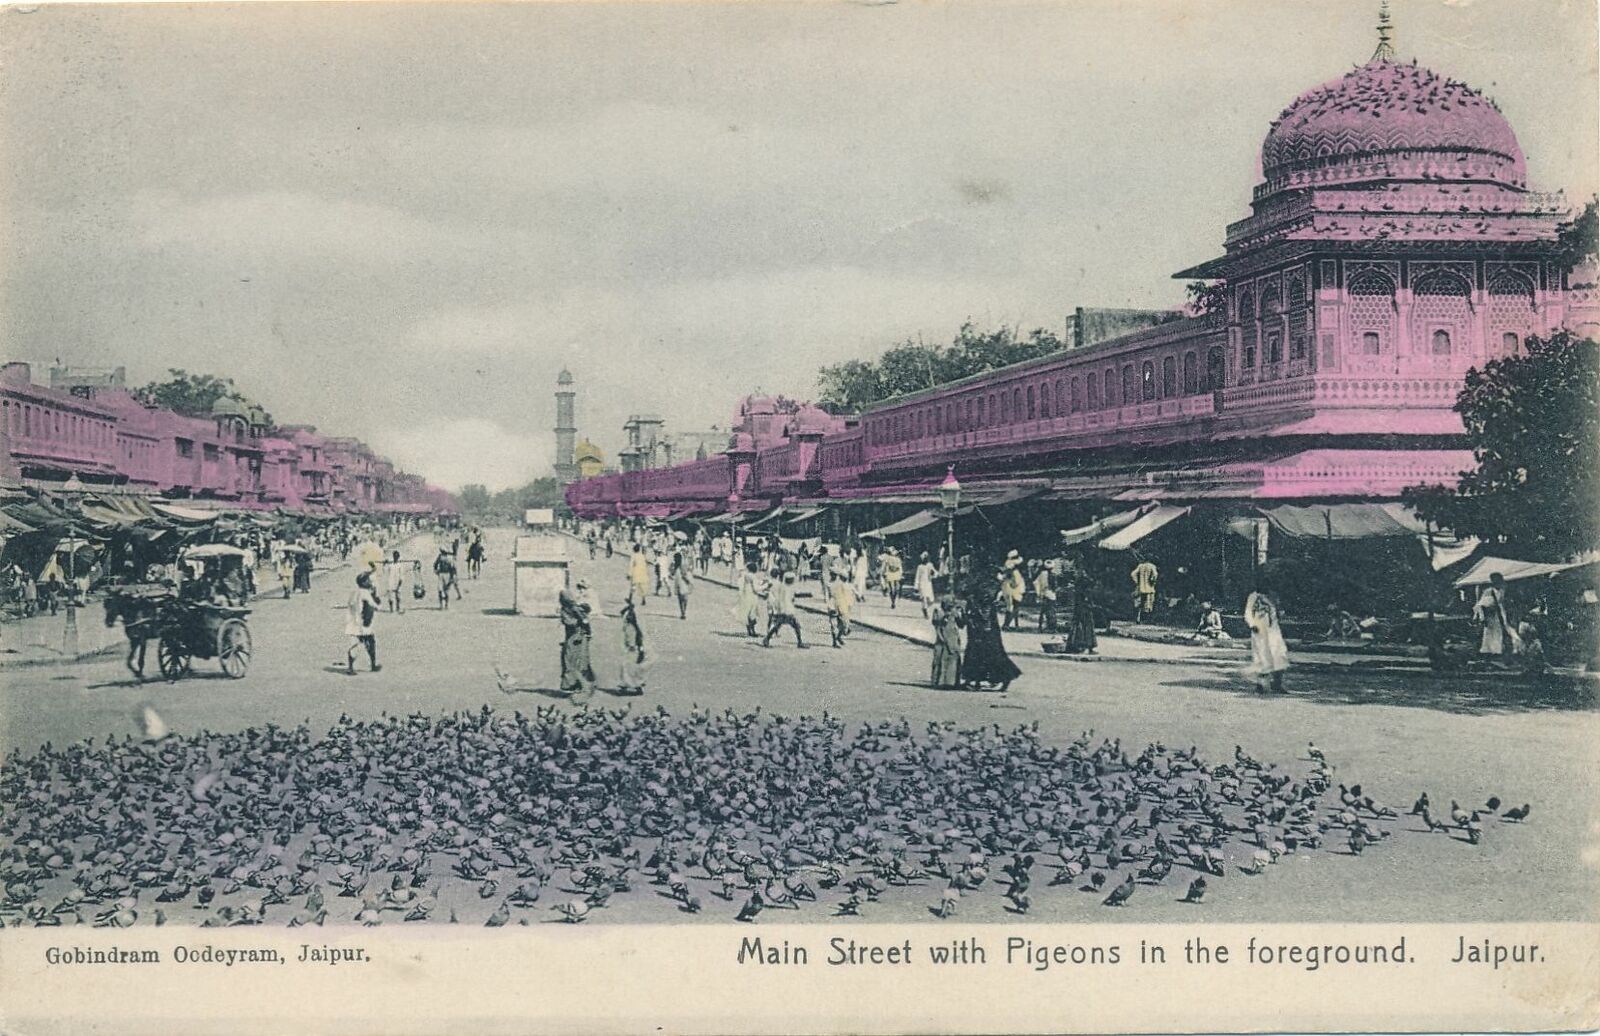 JAIPUR - Main Street with Pigeons in The Foreground - India